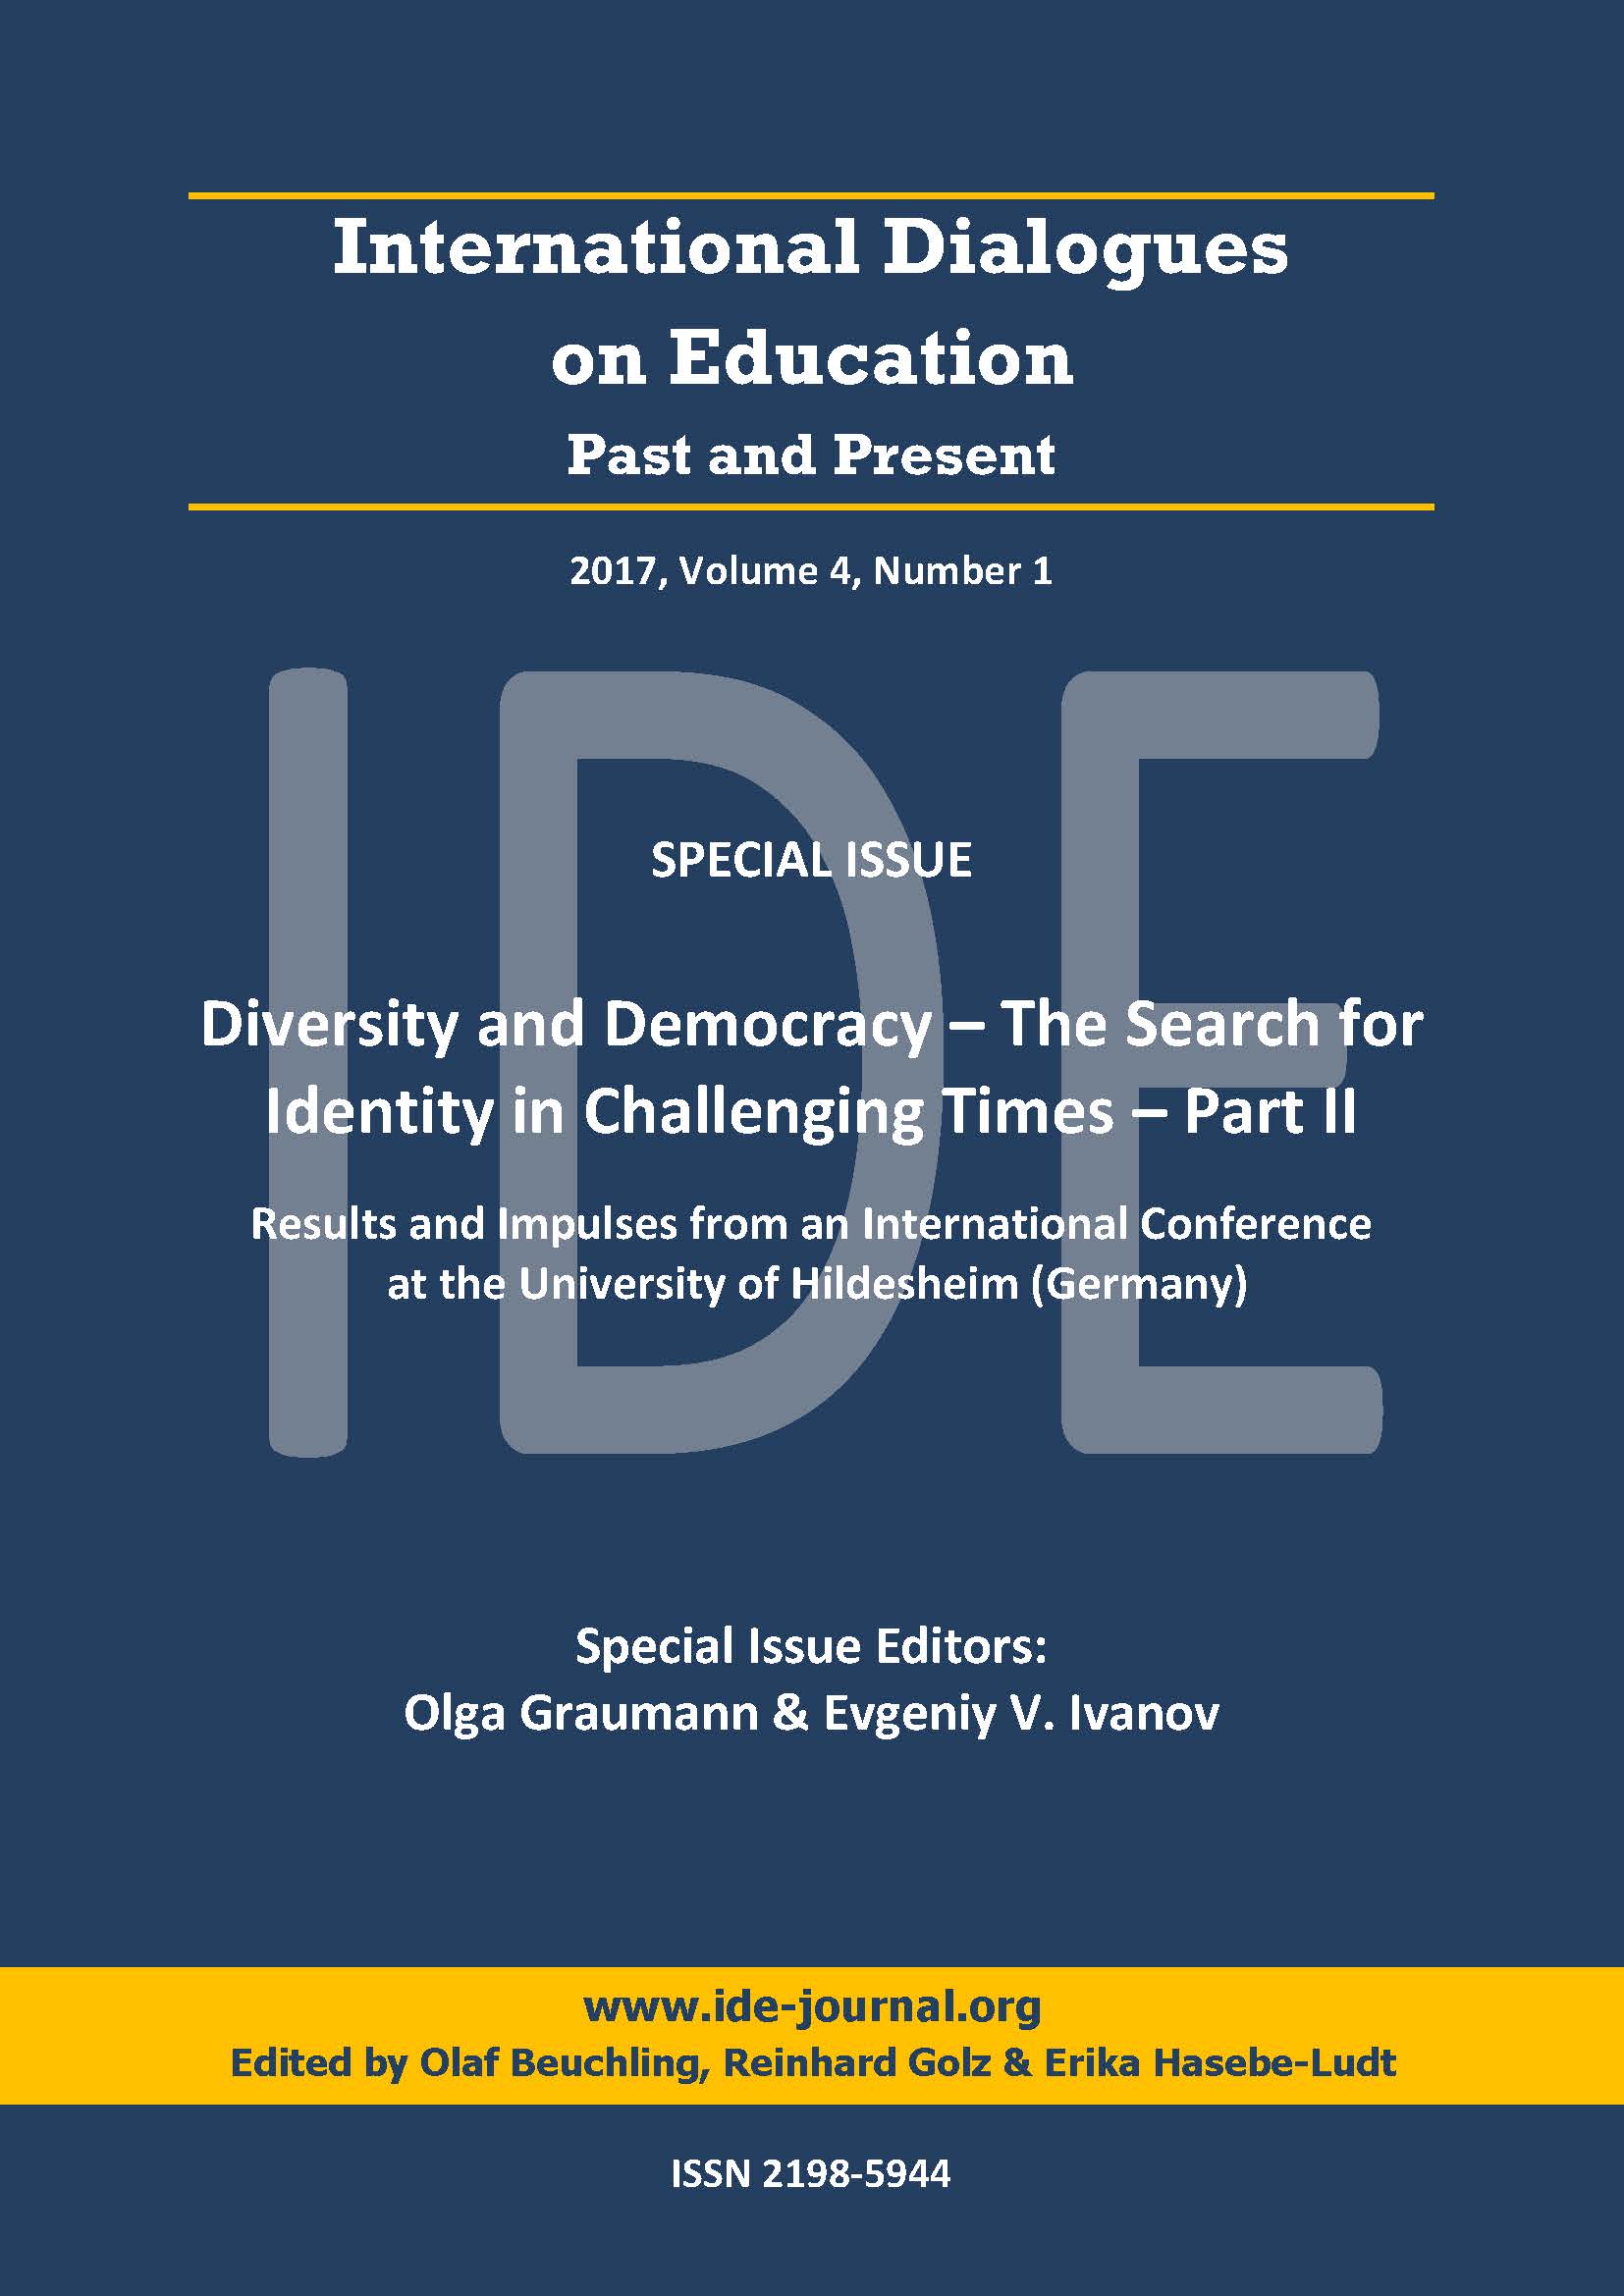 					View Vol. 4 No. 1 (2017): Special Issue: Diversity and Democracy – The Search for Identity in Challenging Times: Results and Impulses from a Conference Part II
				